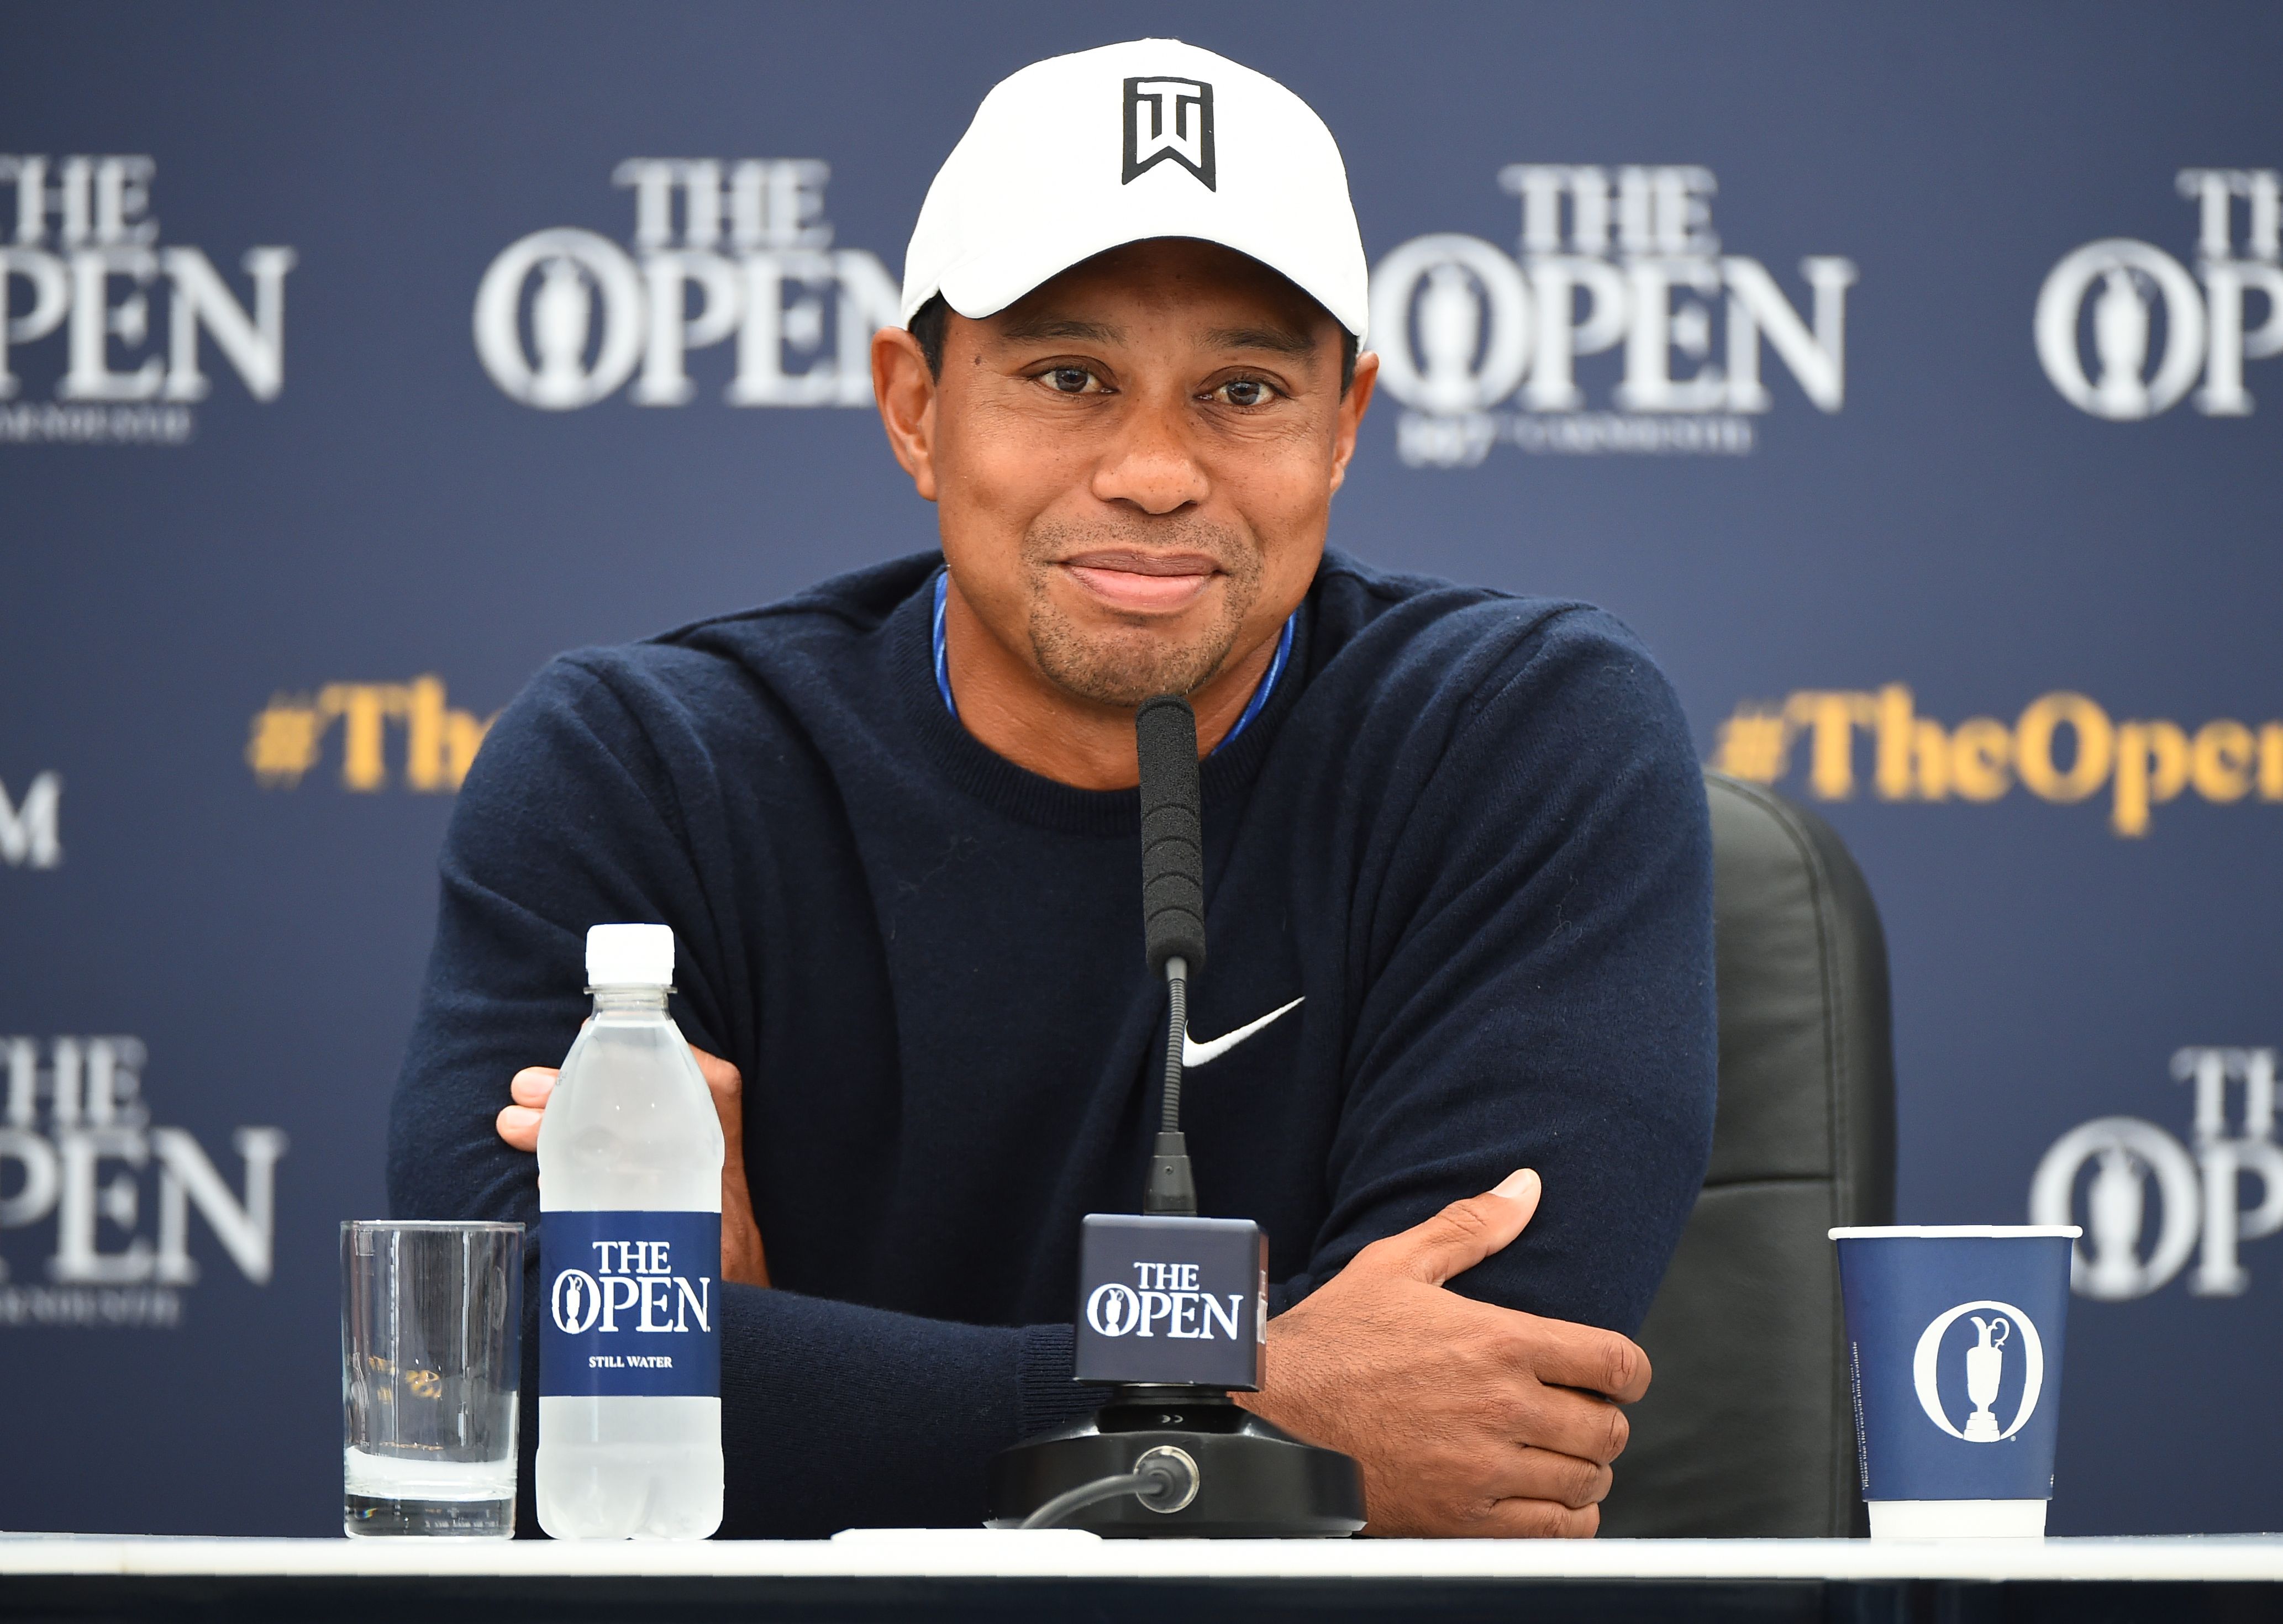 Tiger Woods: My new TaylorMade putter will help me at The Open